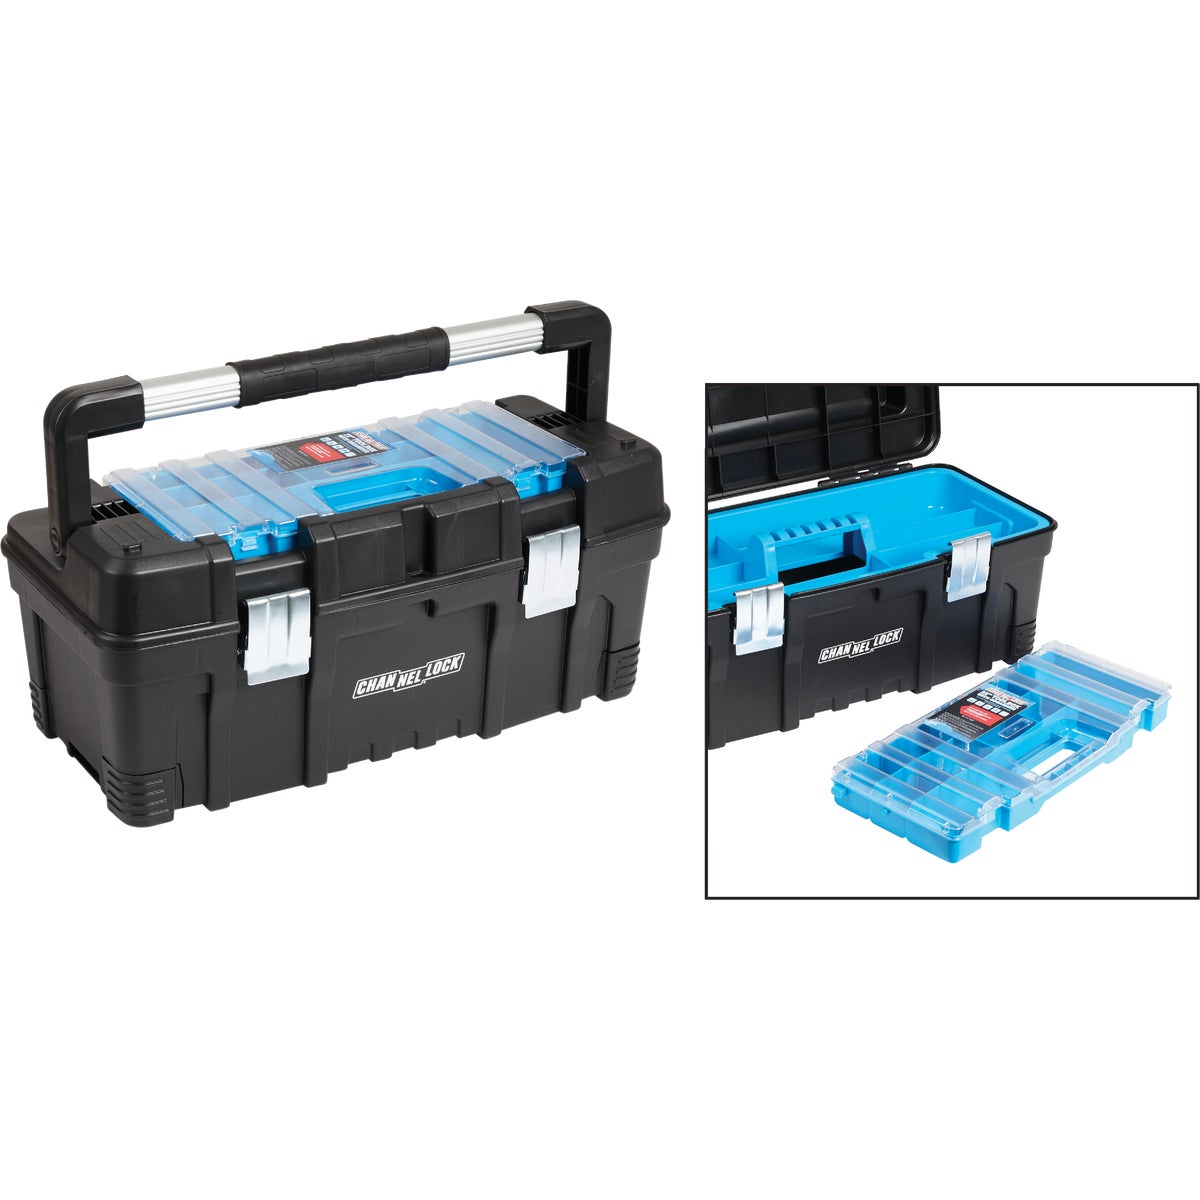 Item 300142, This Channellock toolbox features a removable plastic organizer with 11 